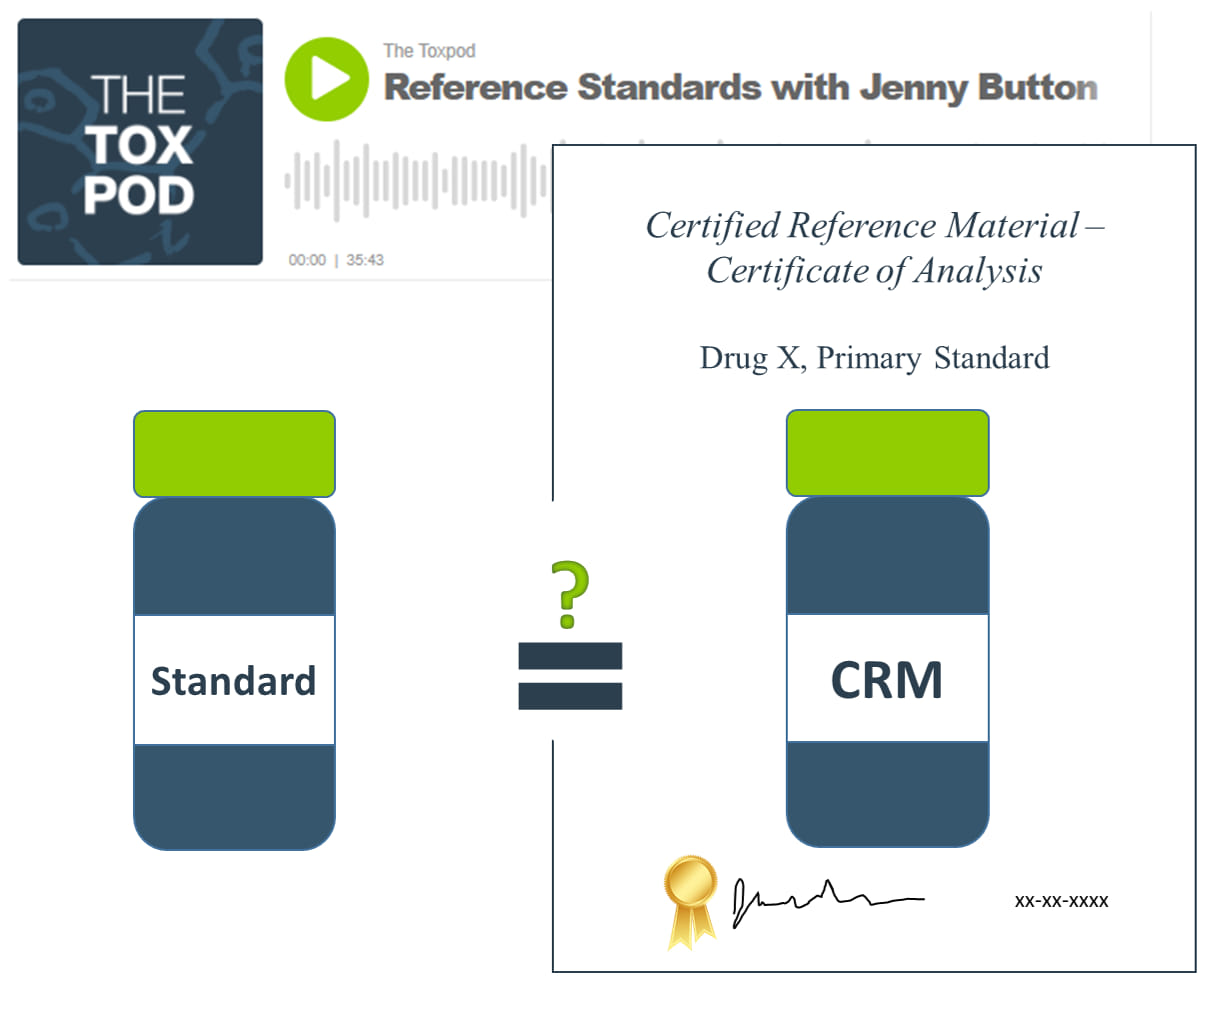 The ToxPod: Reference Standards